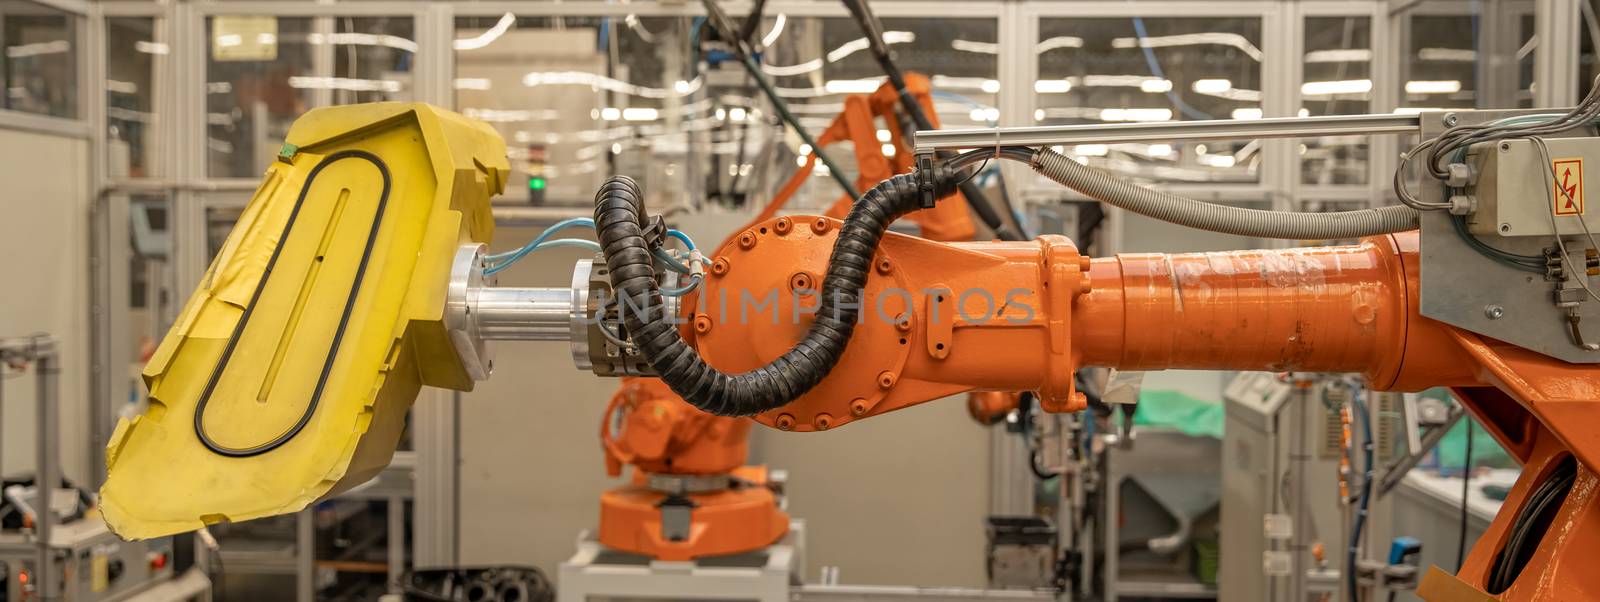 robot arms in the factory performs precise work according to the specified program by Edophoto